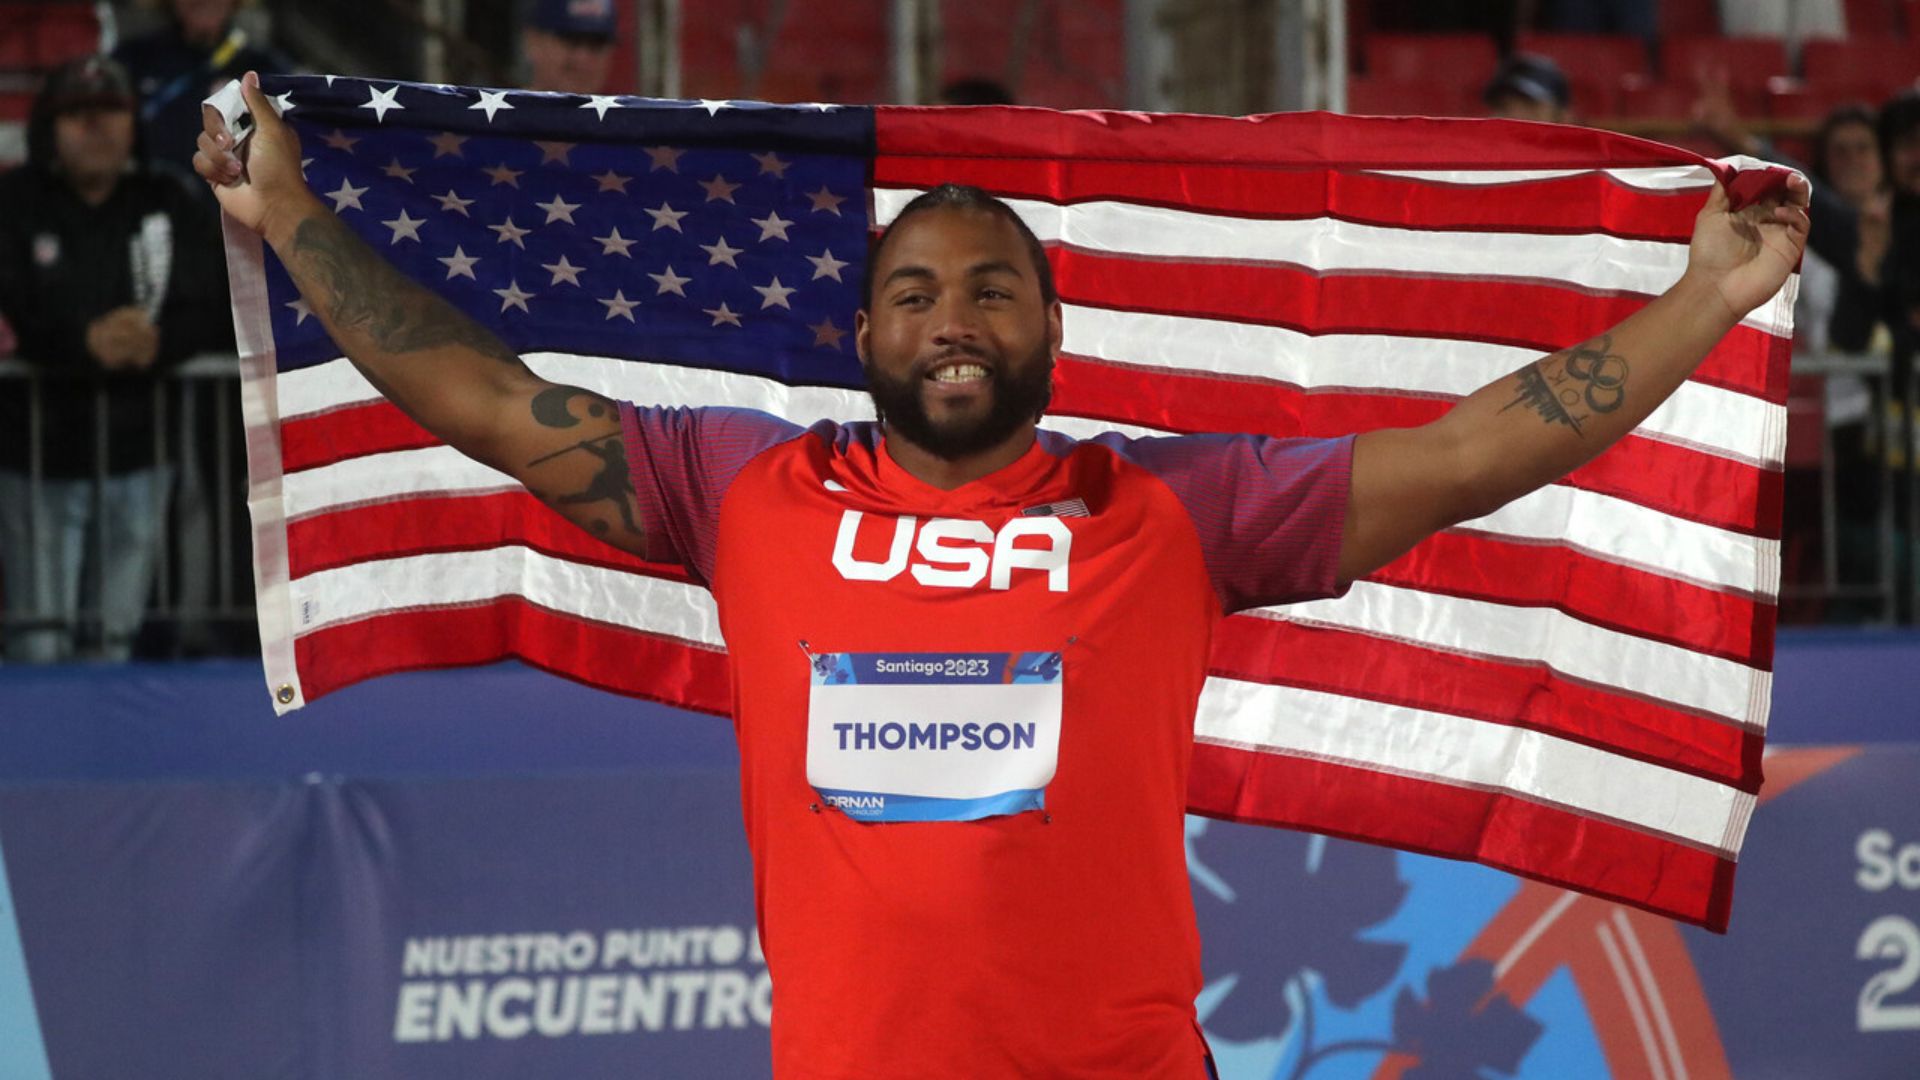 United States wins javelin and the athletics medal tally of Santiago 2023